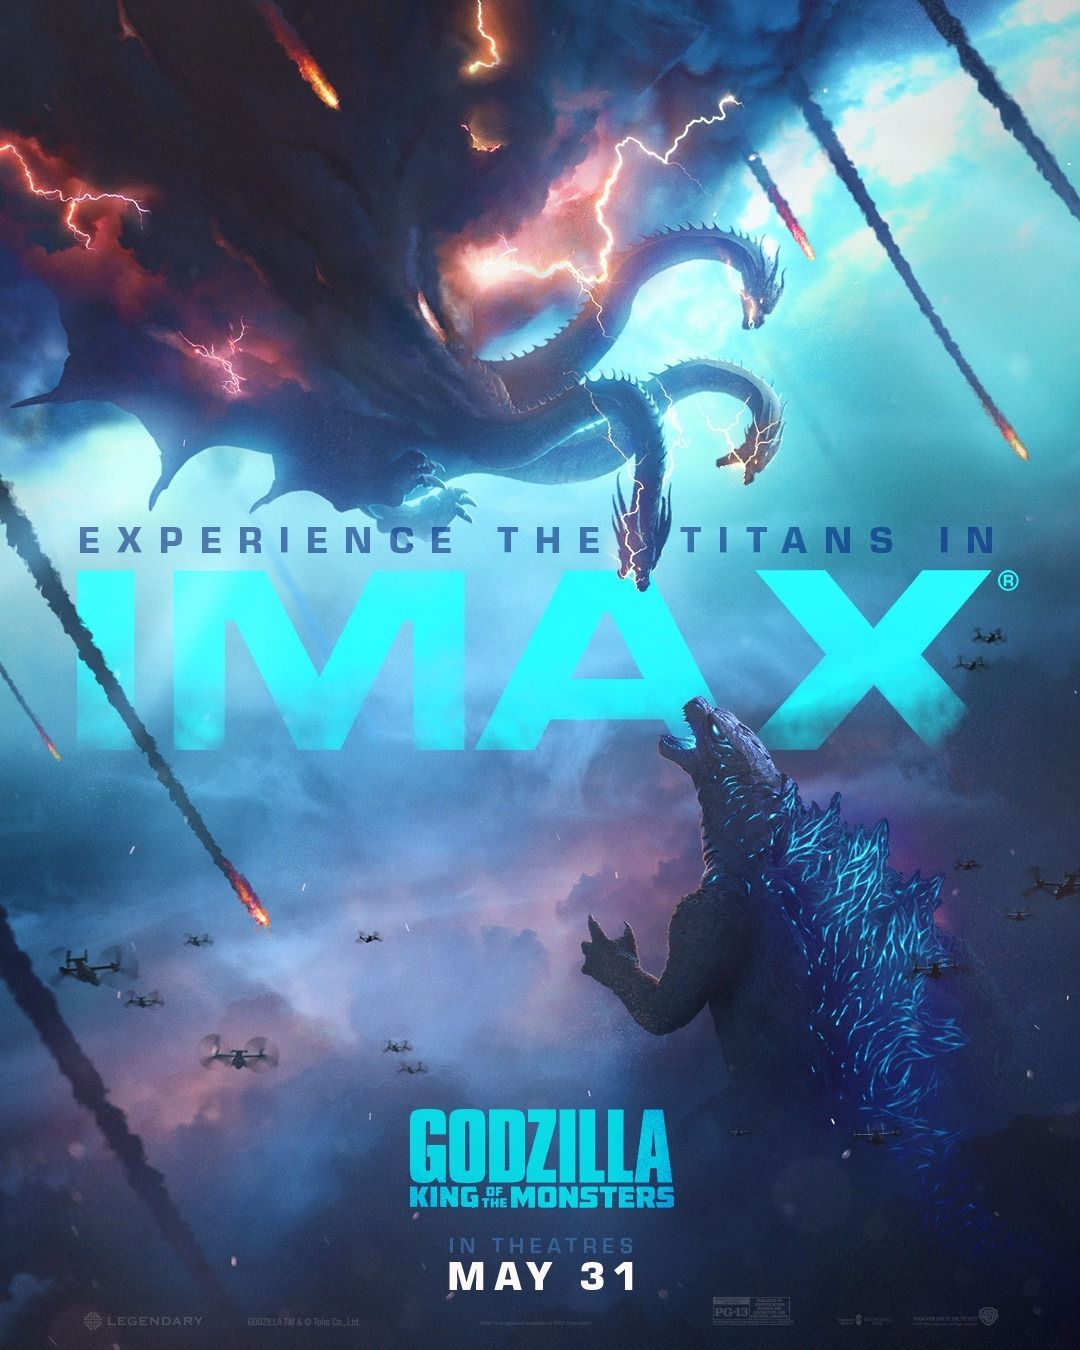 Godzilla King of the Monsters IMAX poster